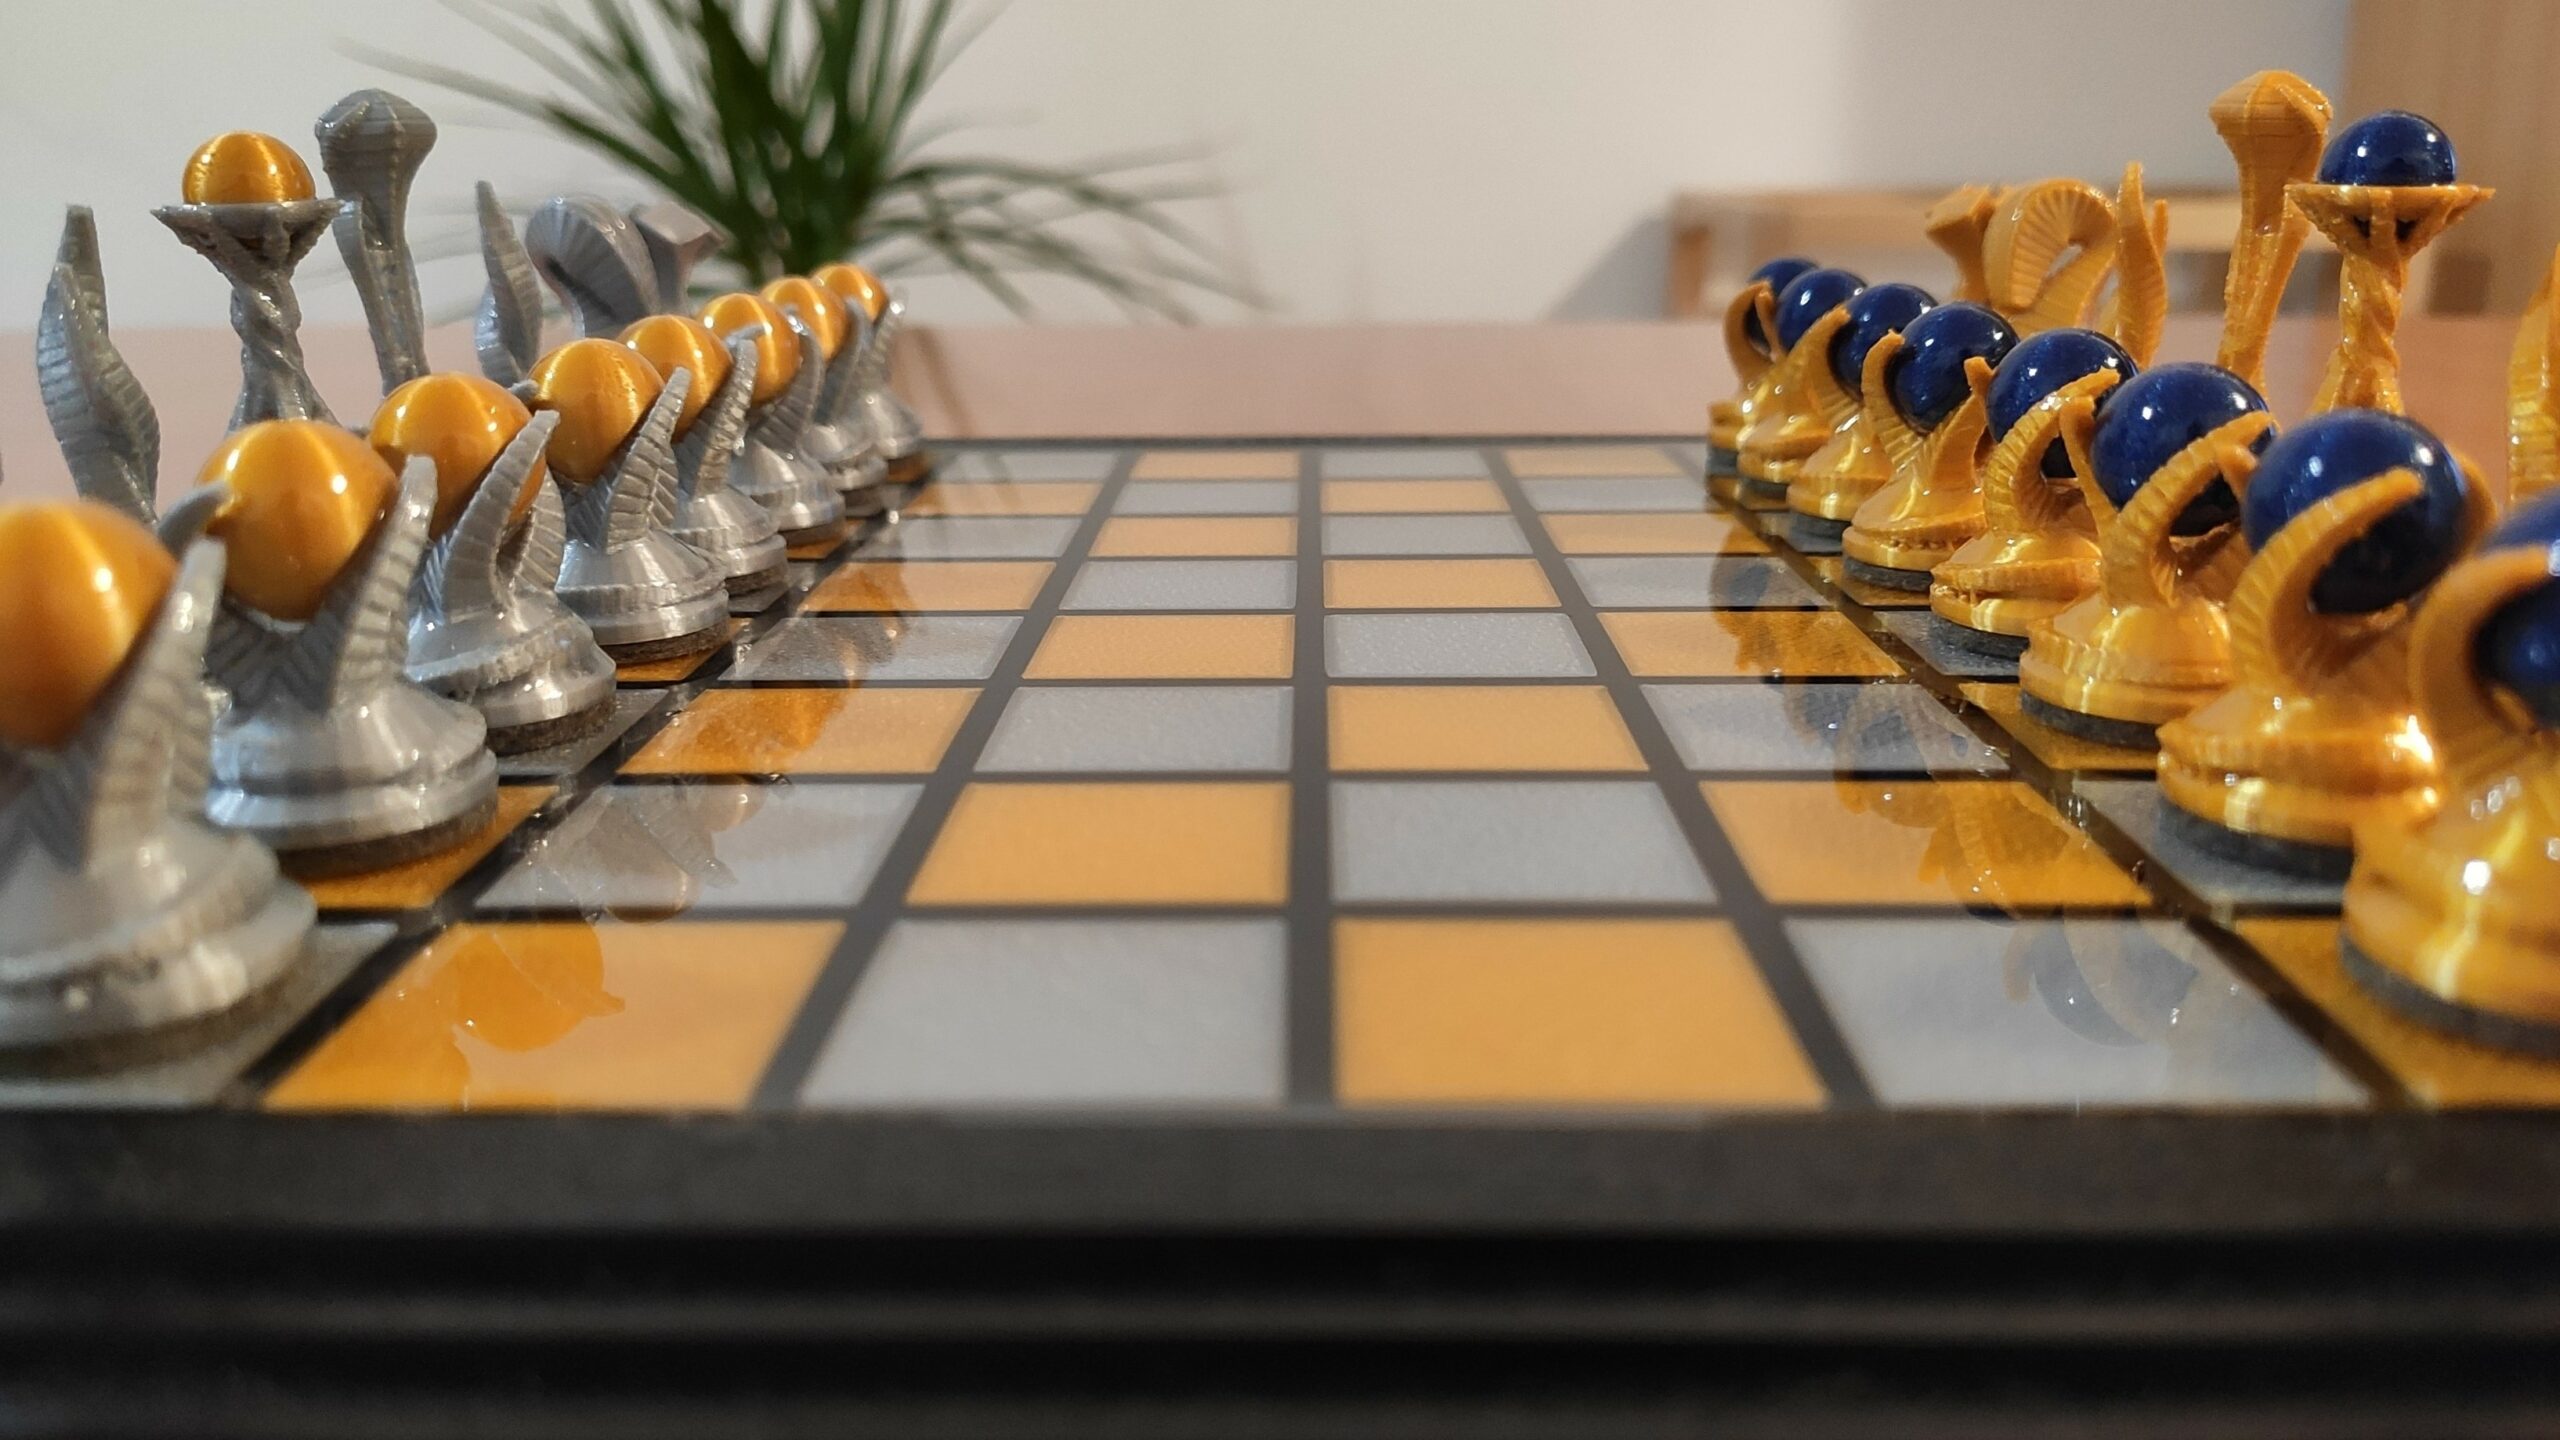 The 40 Best 3D Printed Chess Sets & Boards of 2022 | All3DP